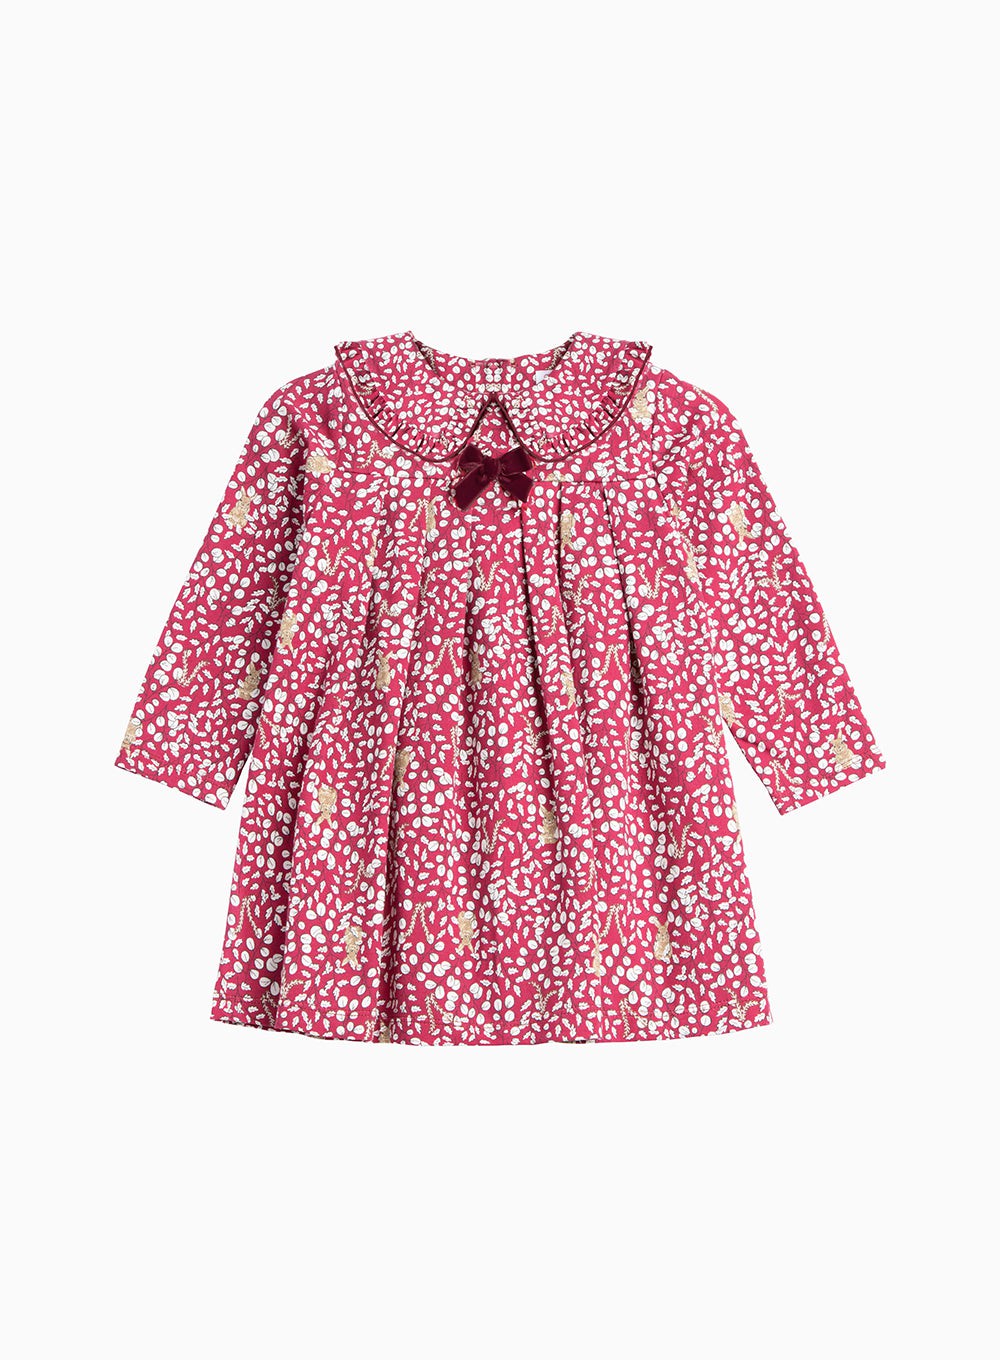 Confiture Dress Little Woodland Bunny Jersey Dress in Berry